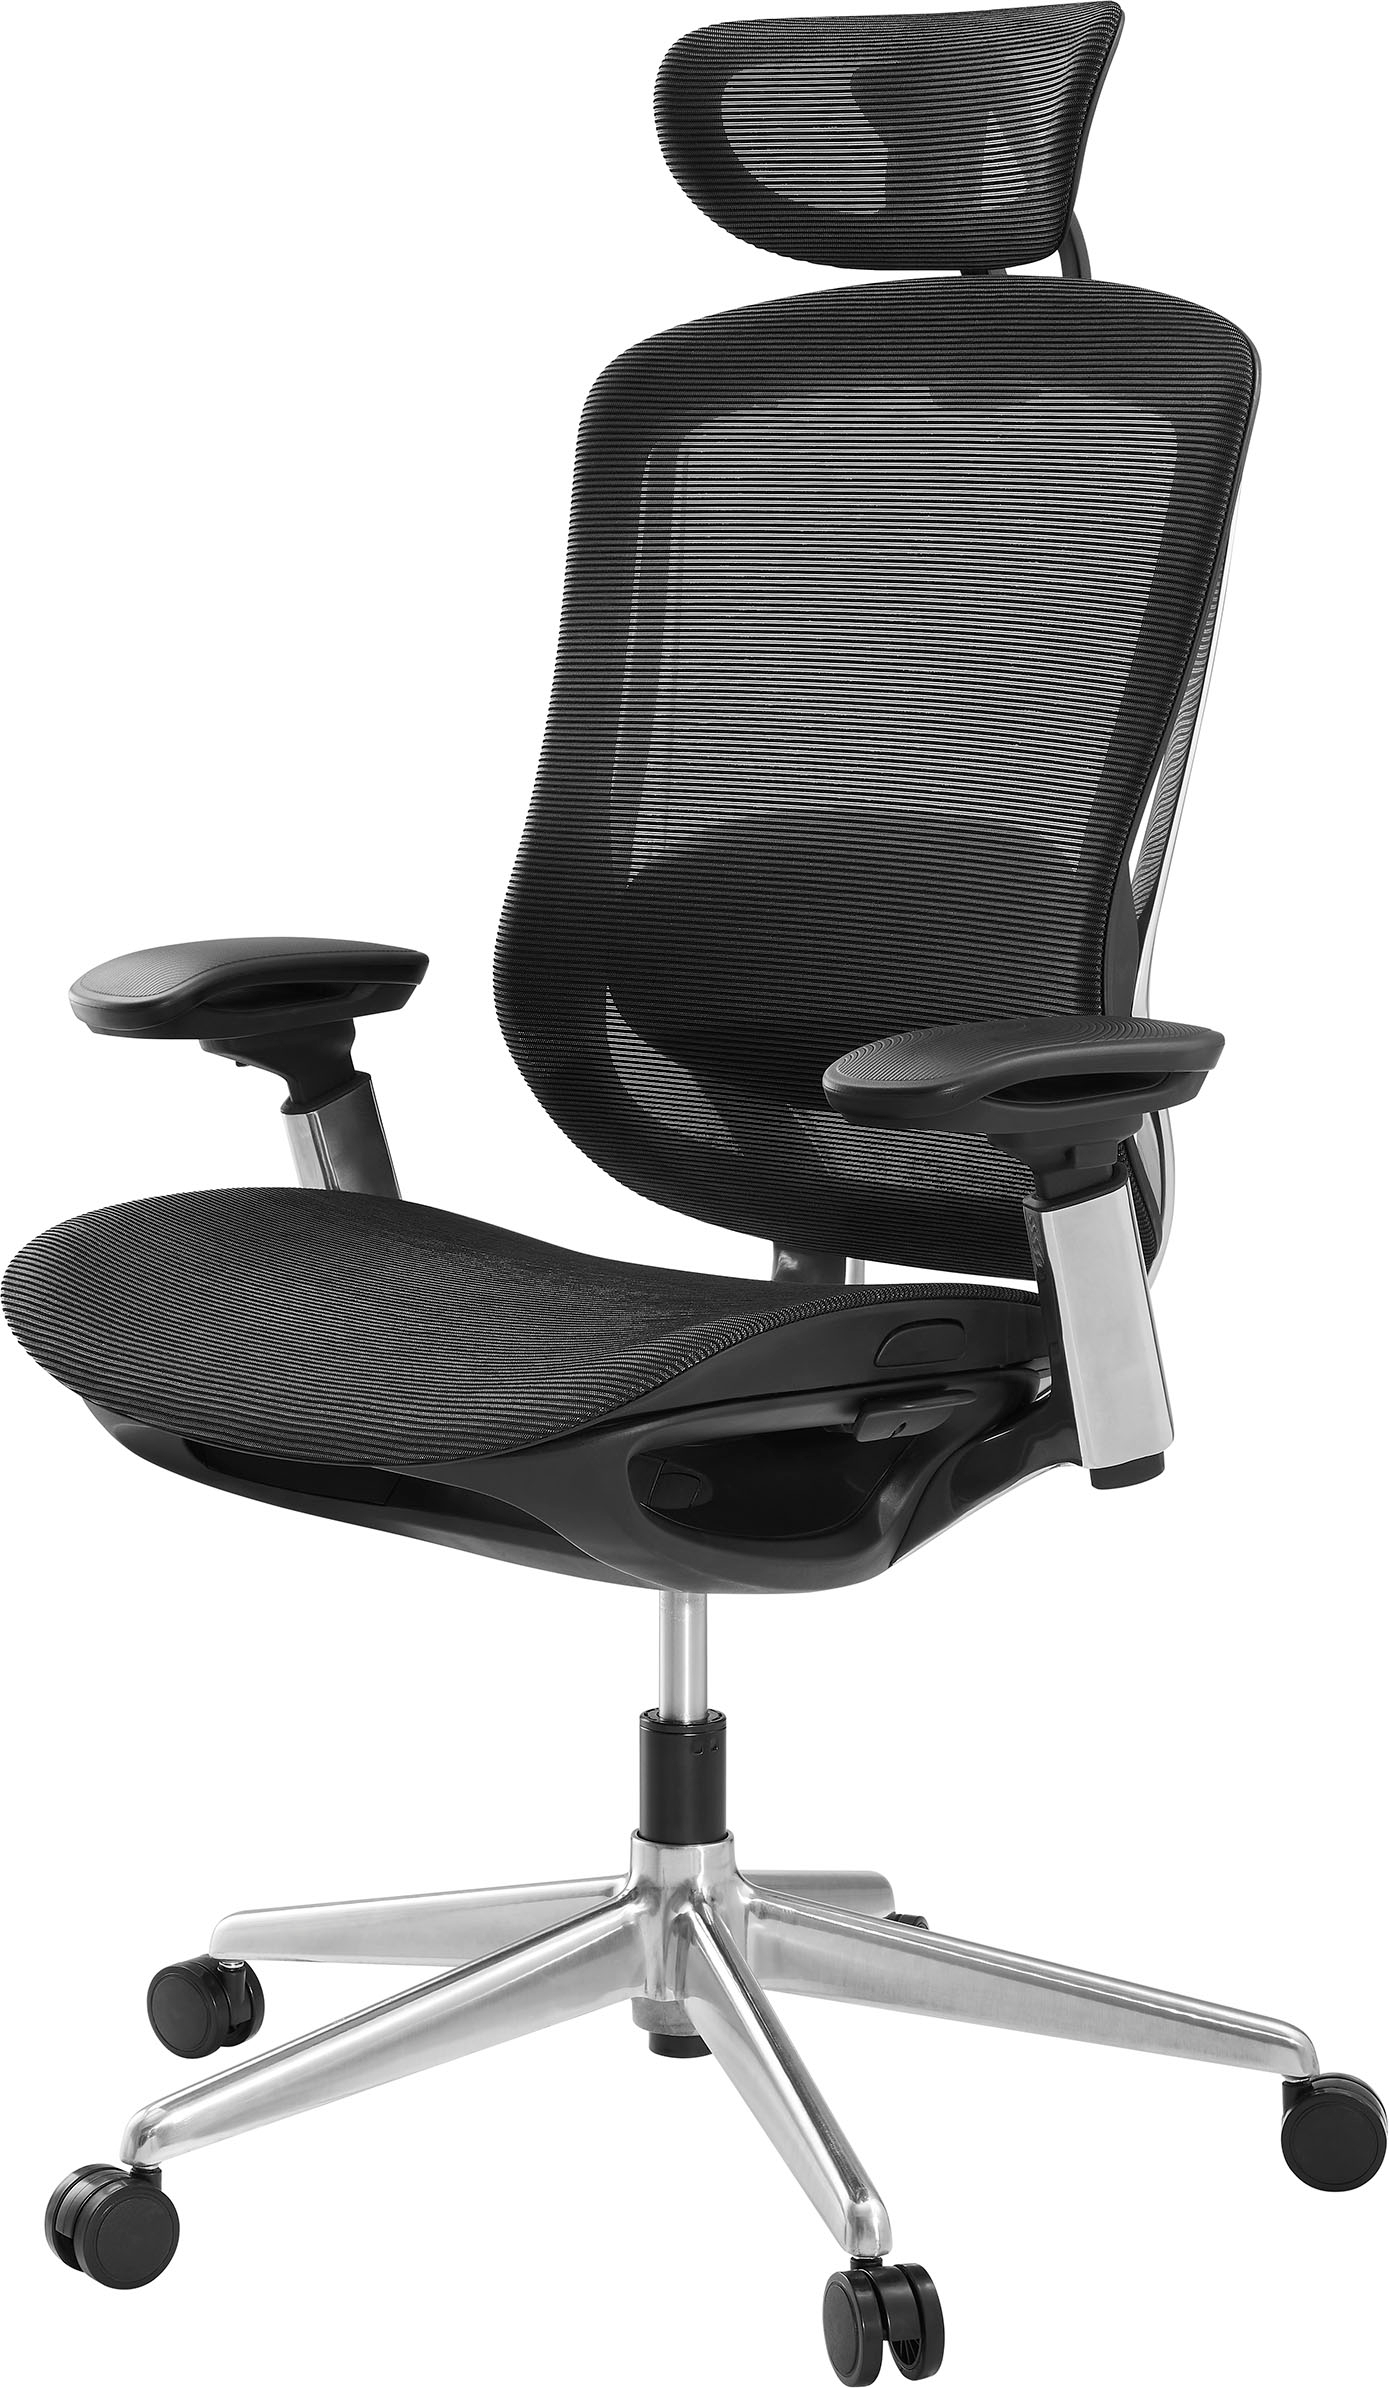 Left View: Steelcase - Series 1 Chair with Seagull Frame - Oatmeal